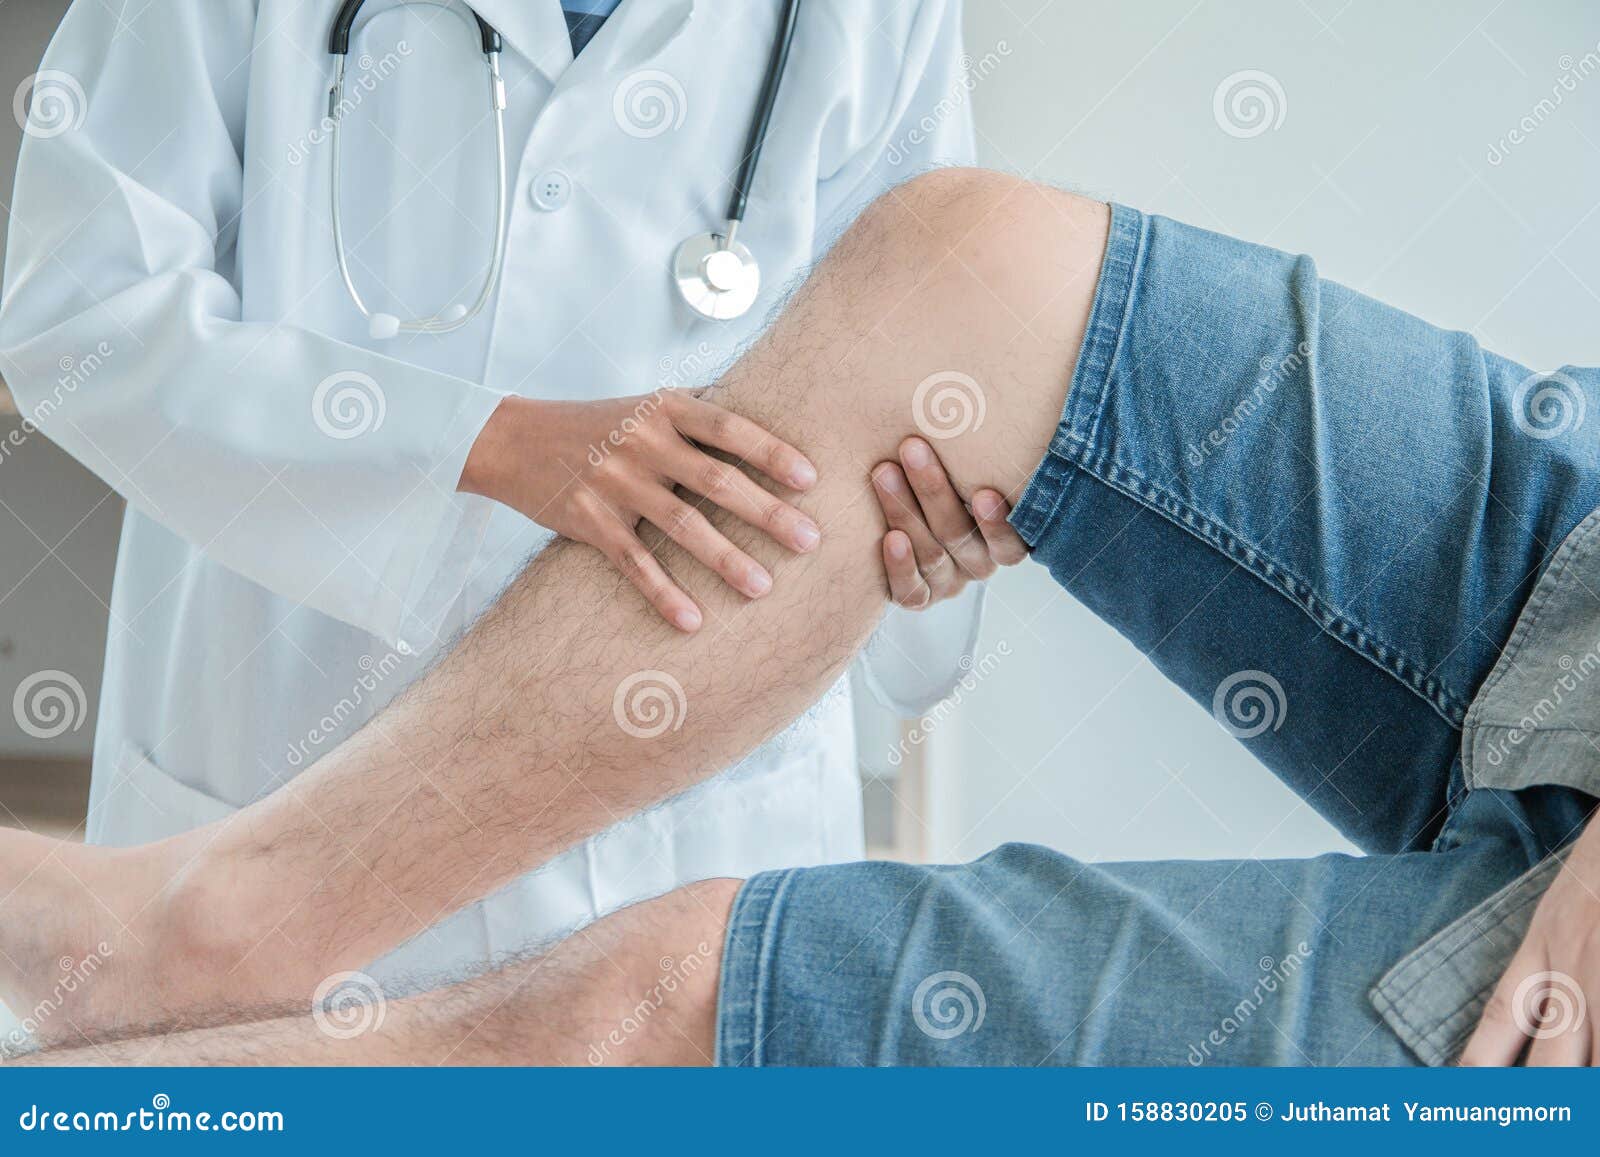 concept healthy ,male patient in blue shirt visiting doctor of orthopedics examining injured leg and knee of male patient